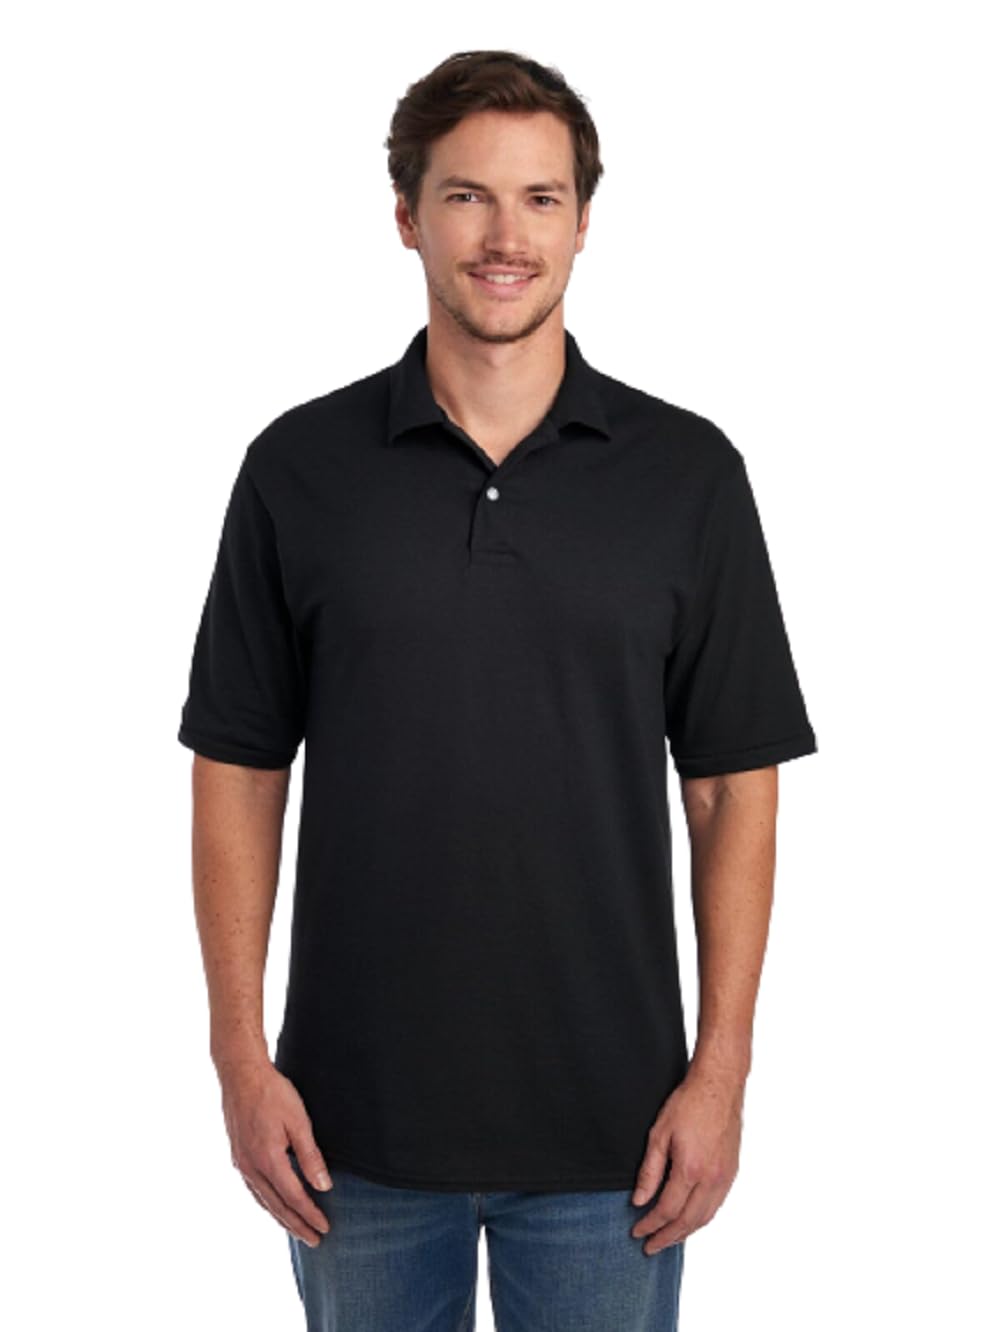 Jerzees Men's SpotShield Stain Resistant Short Sleeve Polo Shirts (Black or Royal or White, S-5X) $9.95 + Free Shipping w/ Prime or on $35+